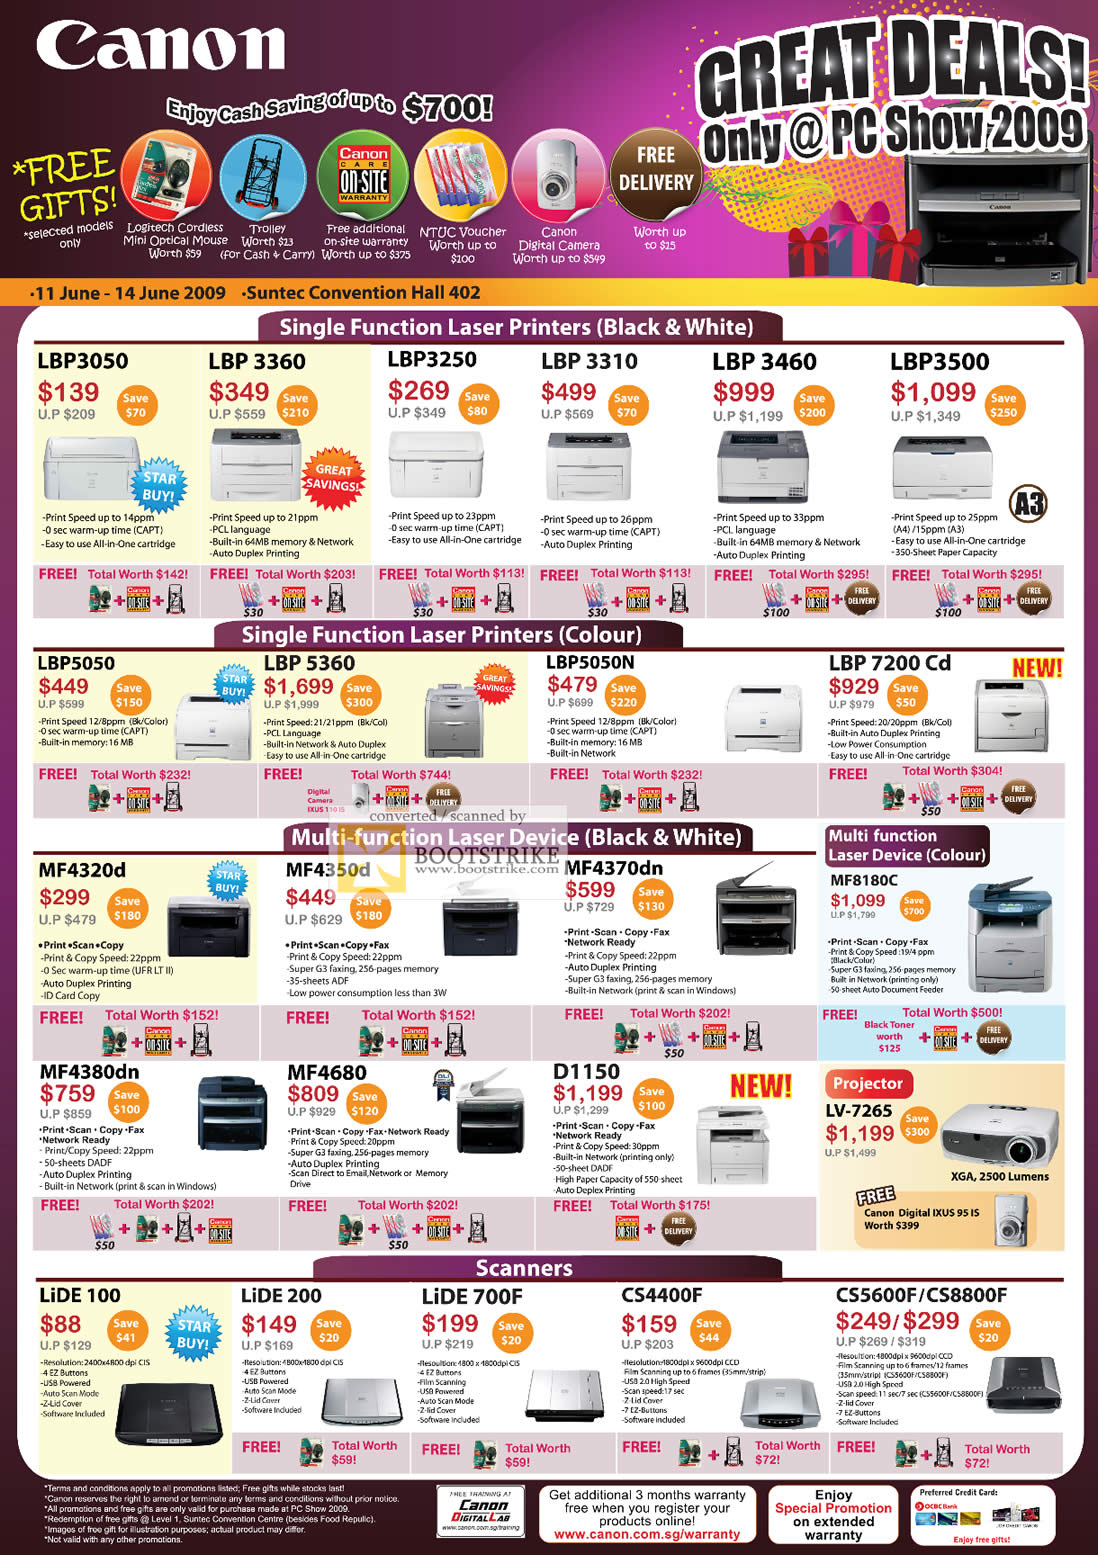 PC Show 2009 price list image brochure of Canon Laser Printers Single Multi Function Scanners